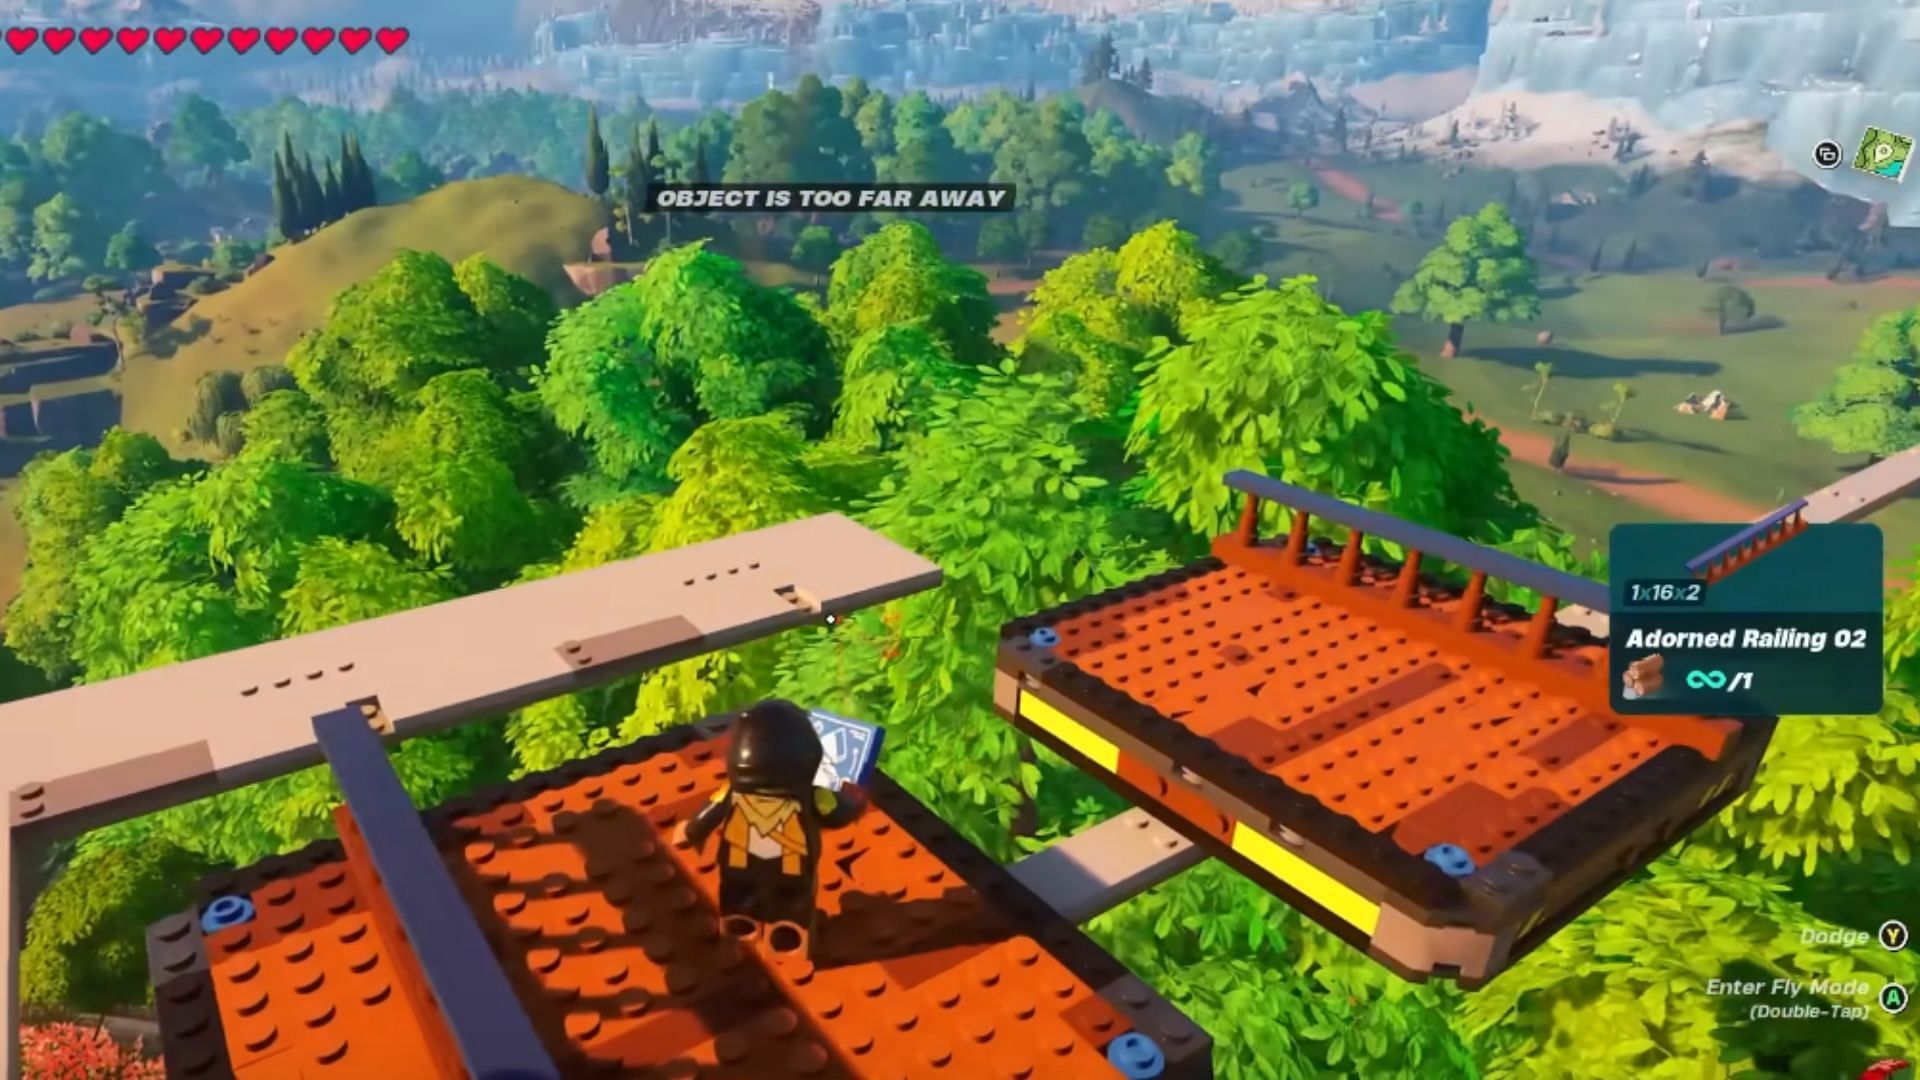 Place 2 Adorned Railings to the Foundations. (Image via Epic Games)